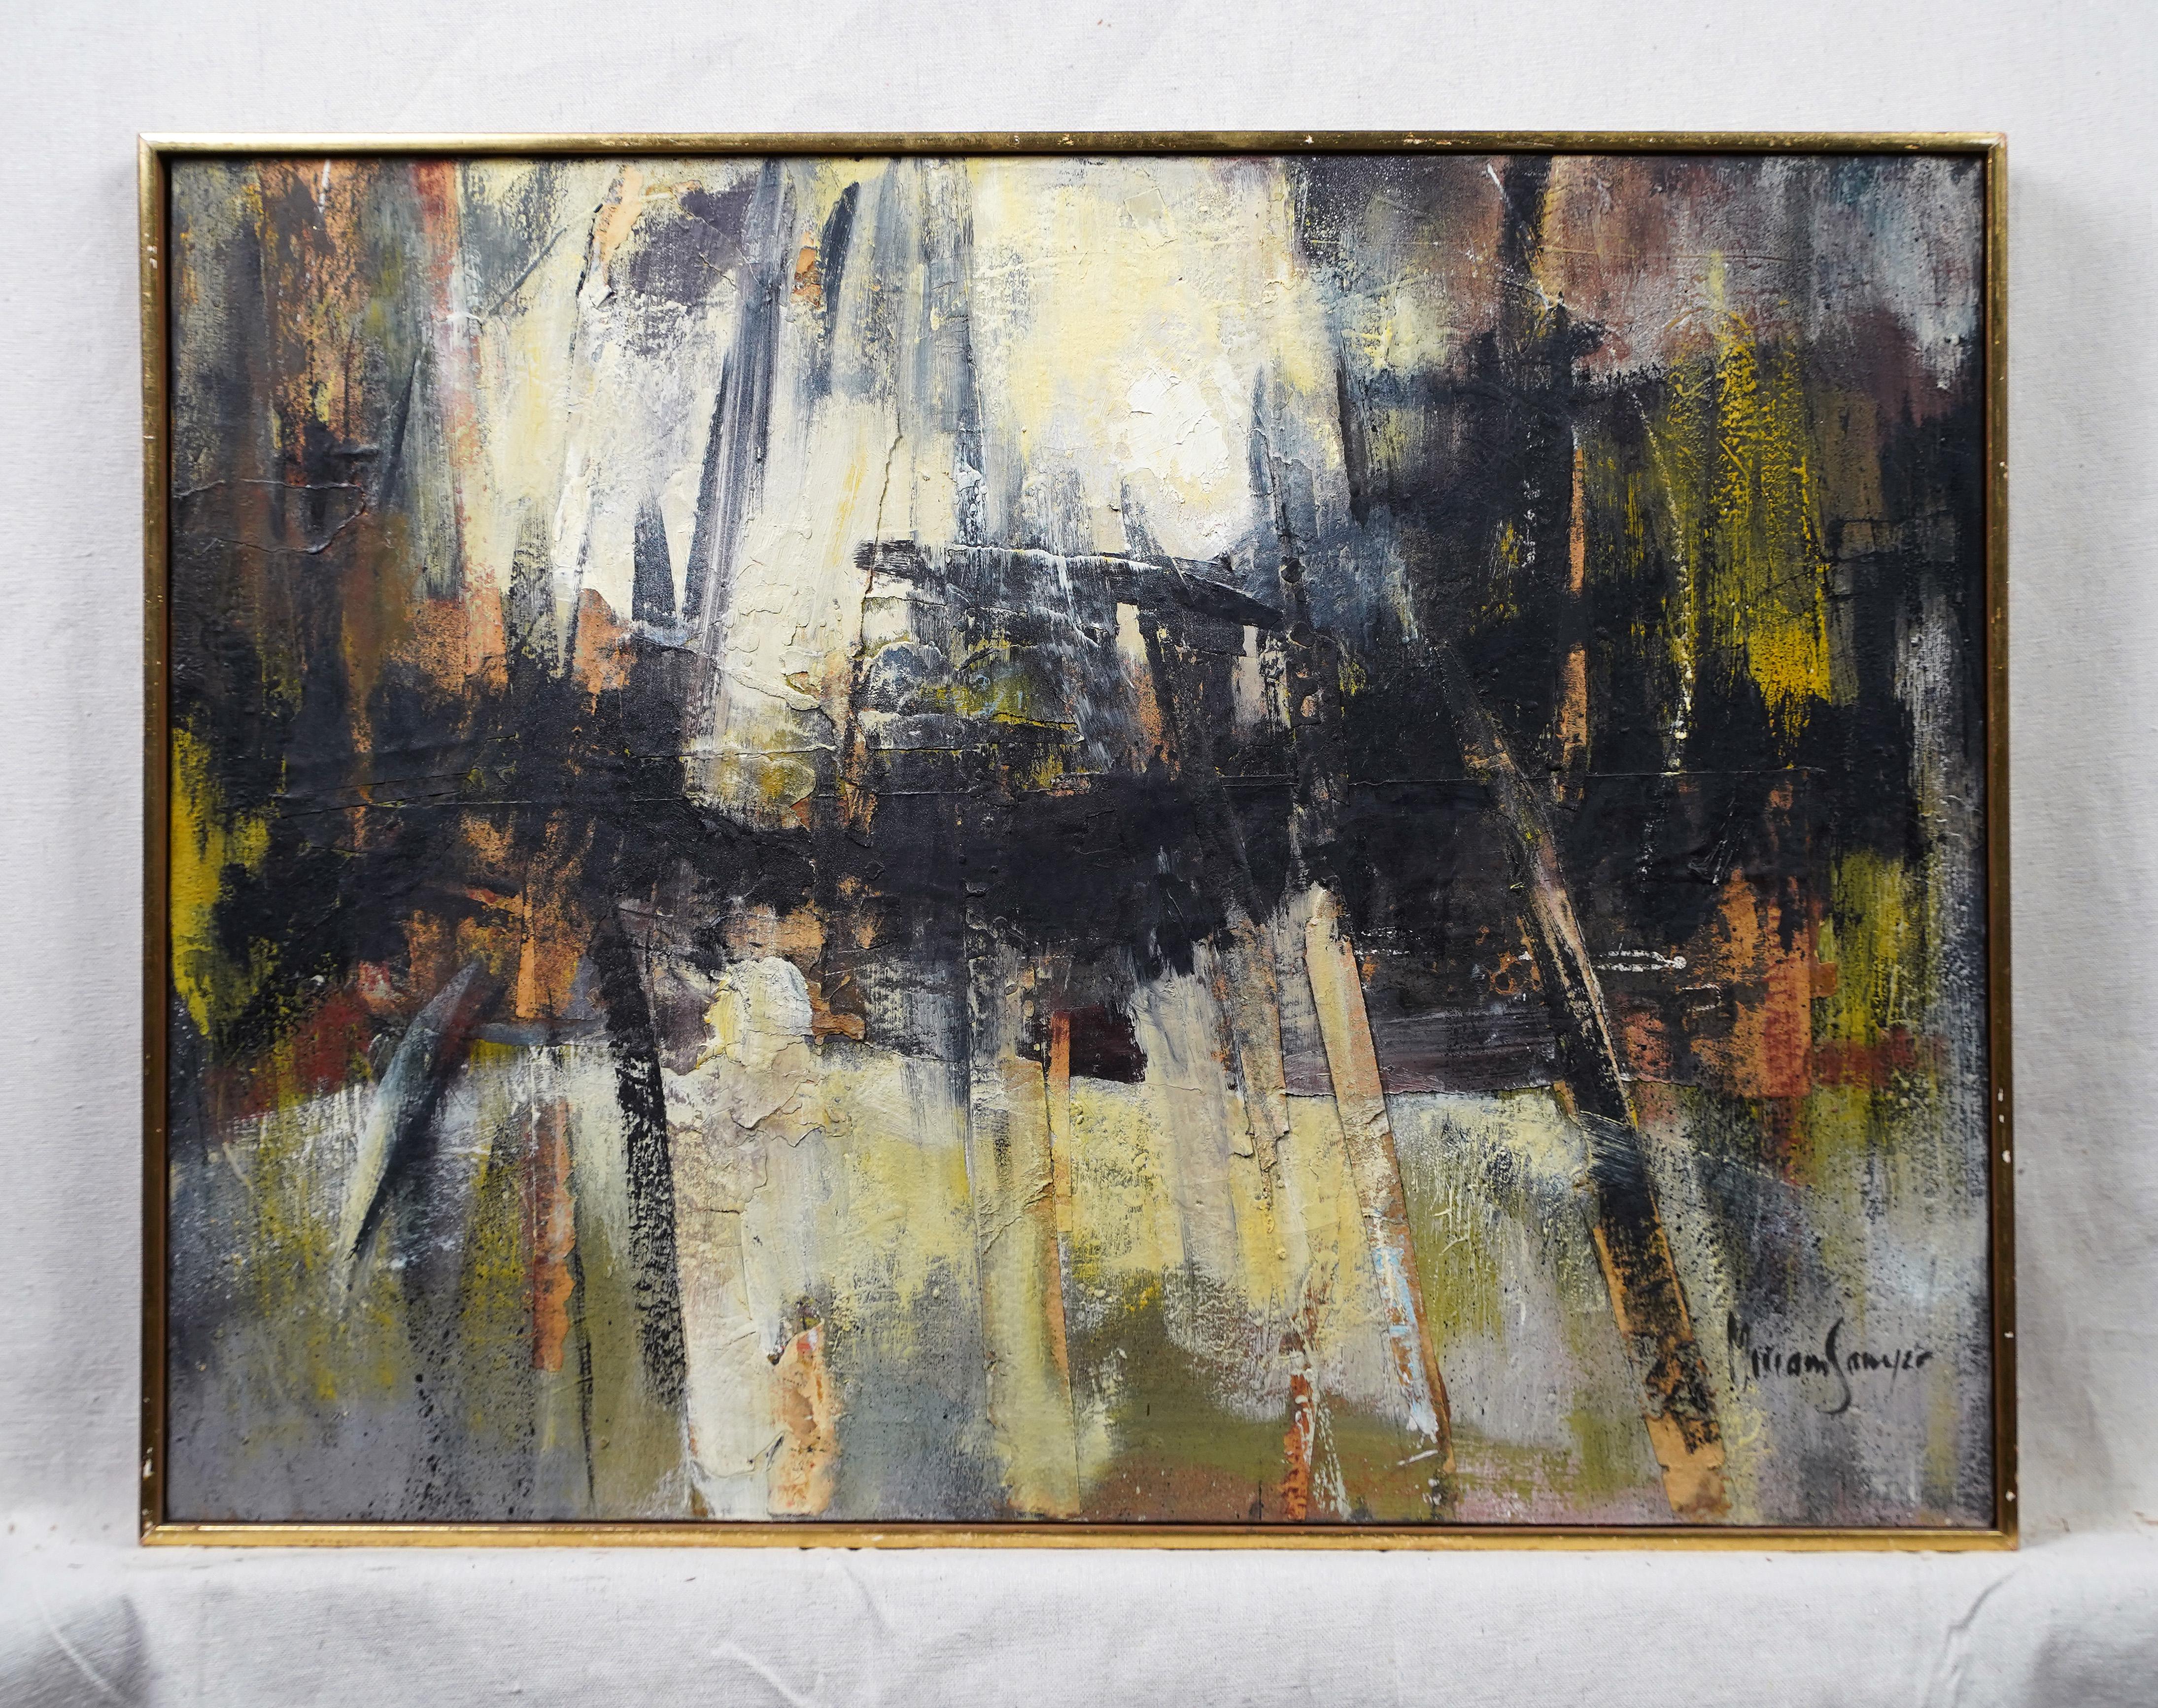 Antique American modernist signed abstract oil painting.  Oil on canvas.  Signed.  Framed. 